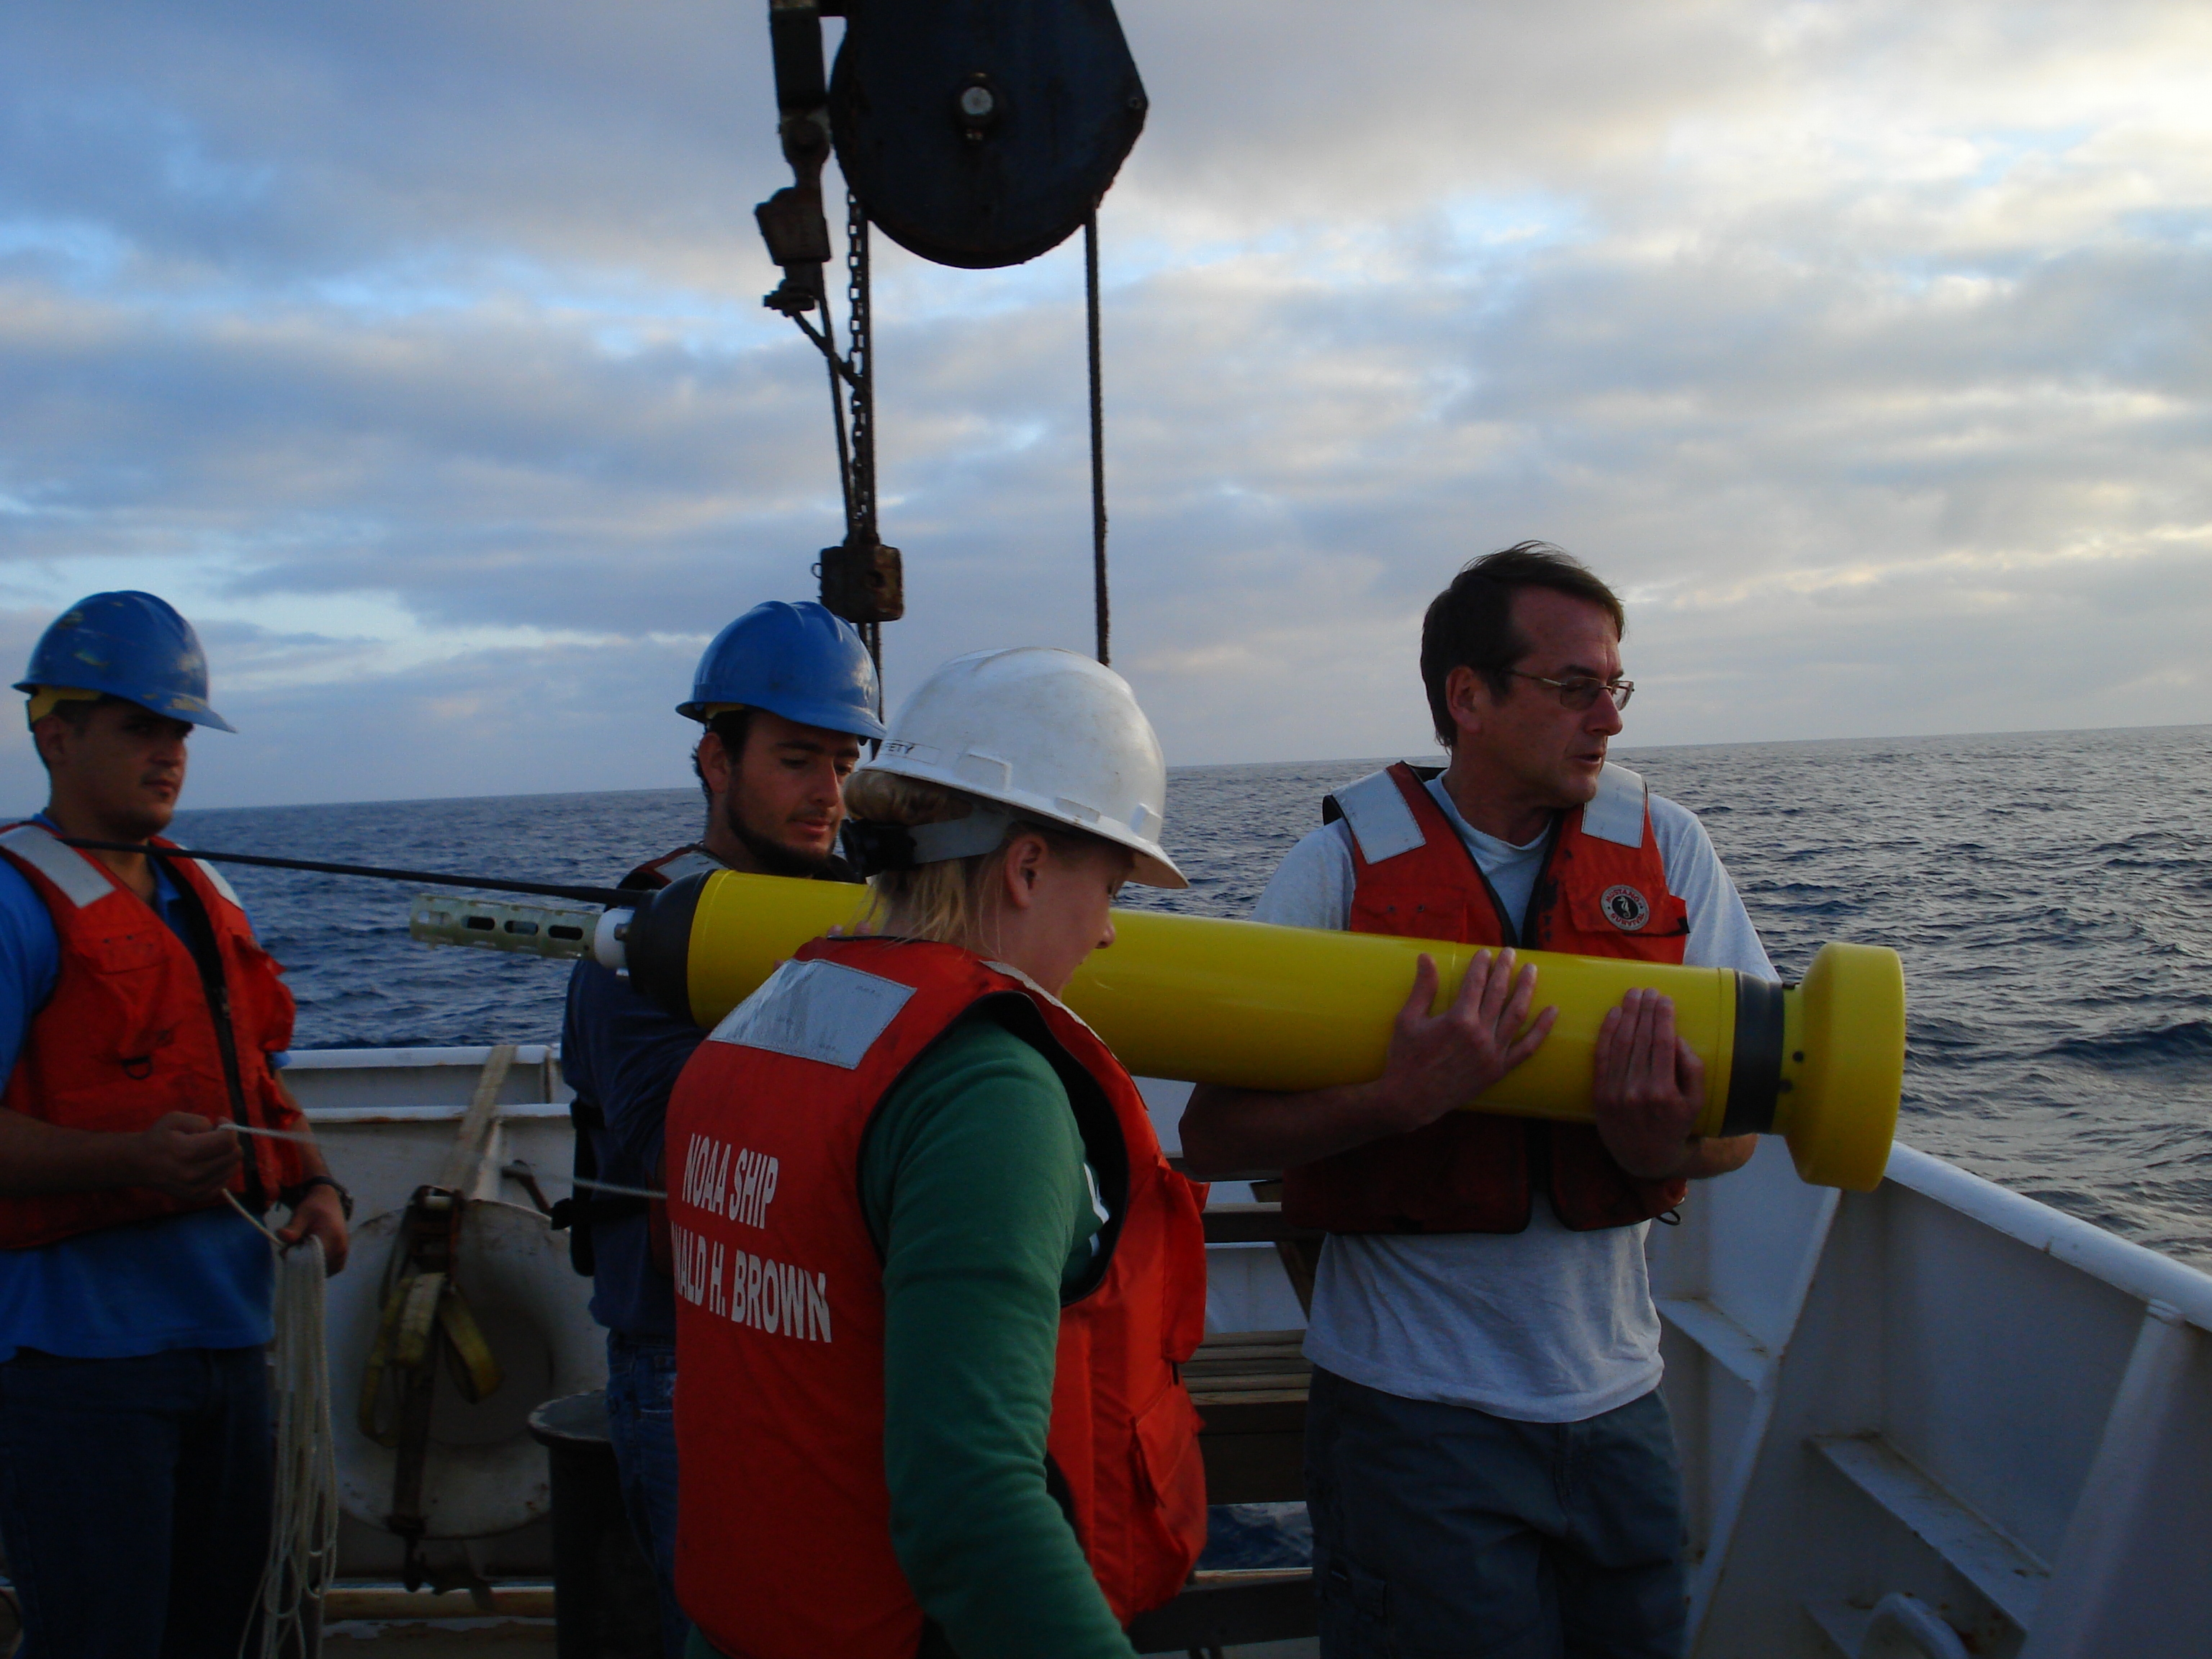 Image showing a NOAA crew deploying an Argo float, which provides real-time climate data about the ocean.